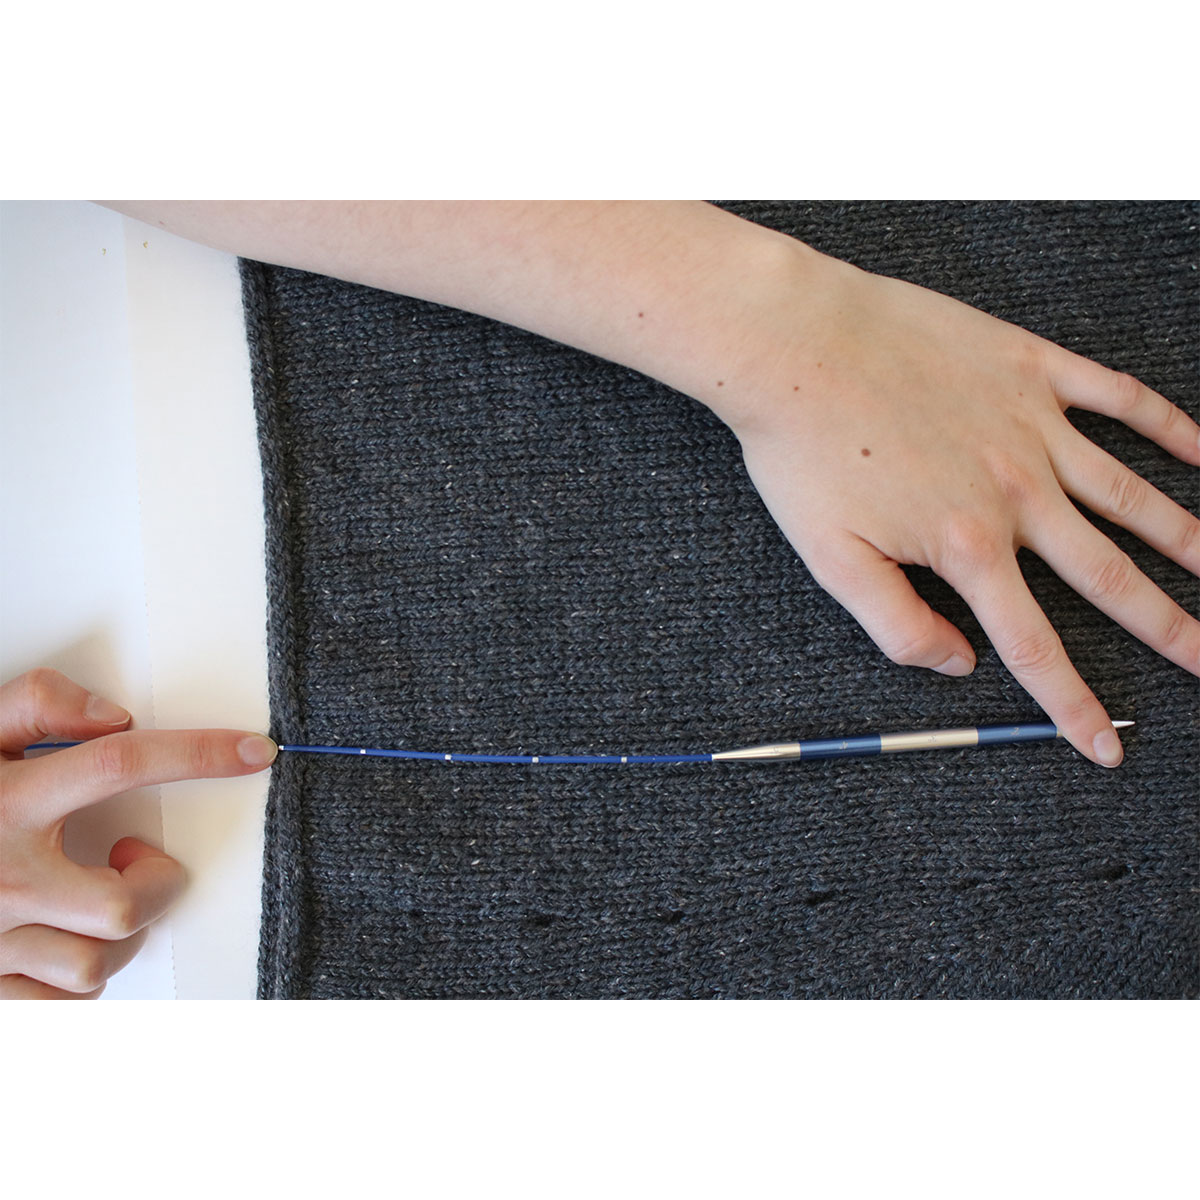 Sonix 32 inch Circular Knitting Needle with Soft Cable (US